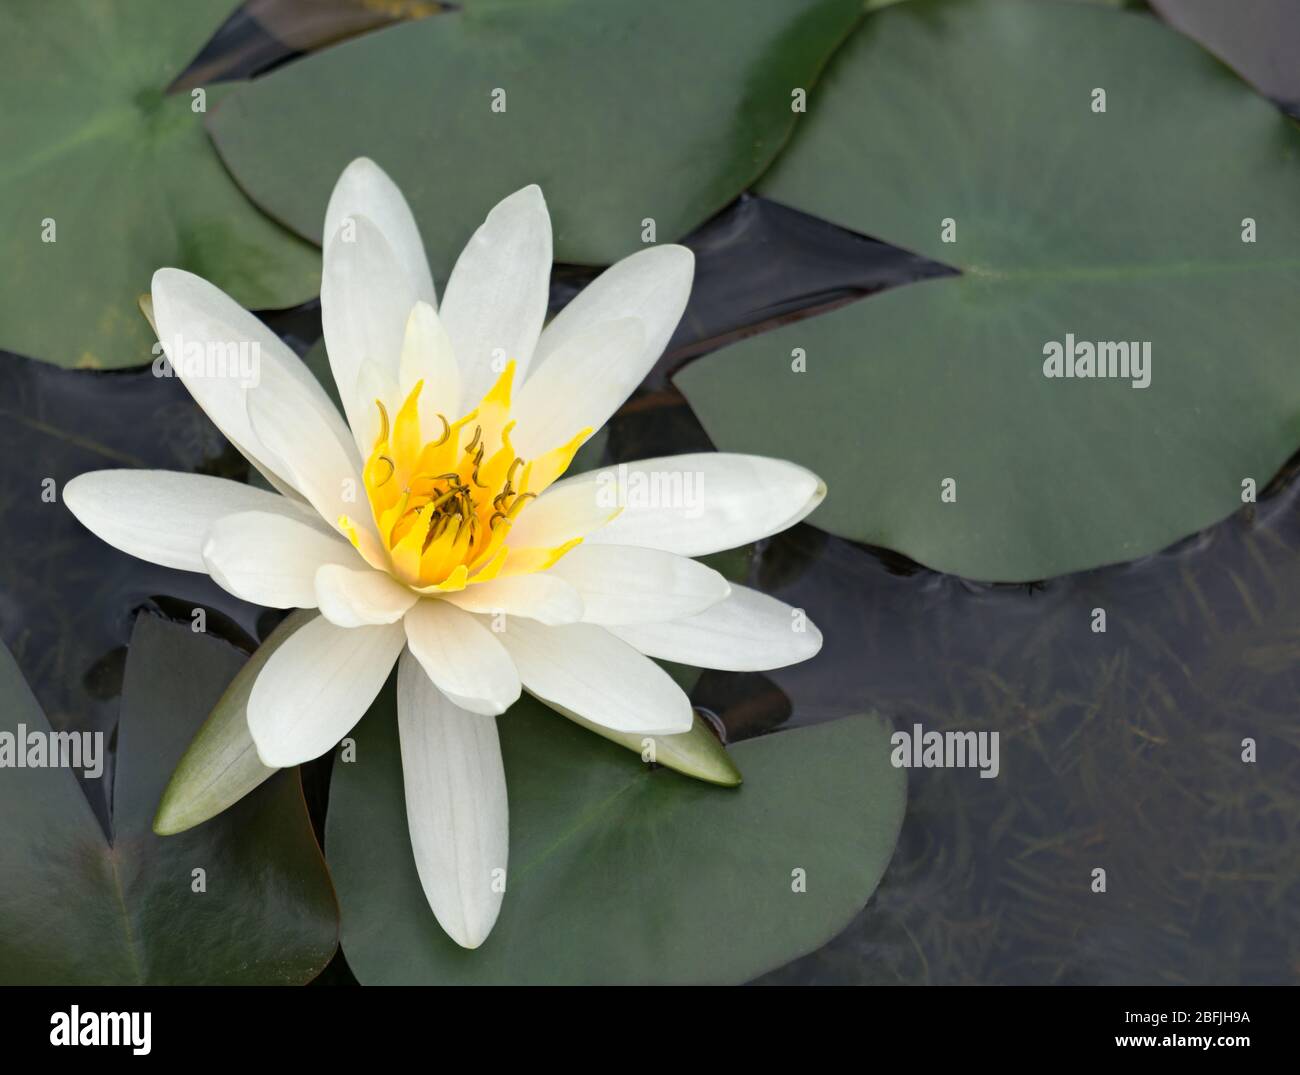 American White Waterlily (Nymphaea odorata) has just opened in a garden pool at biltmore estate, asheville NC Stock Photo